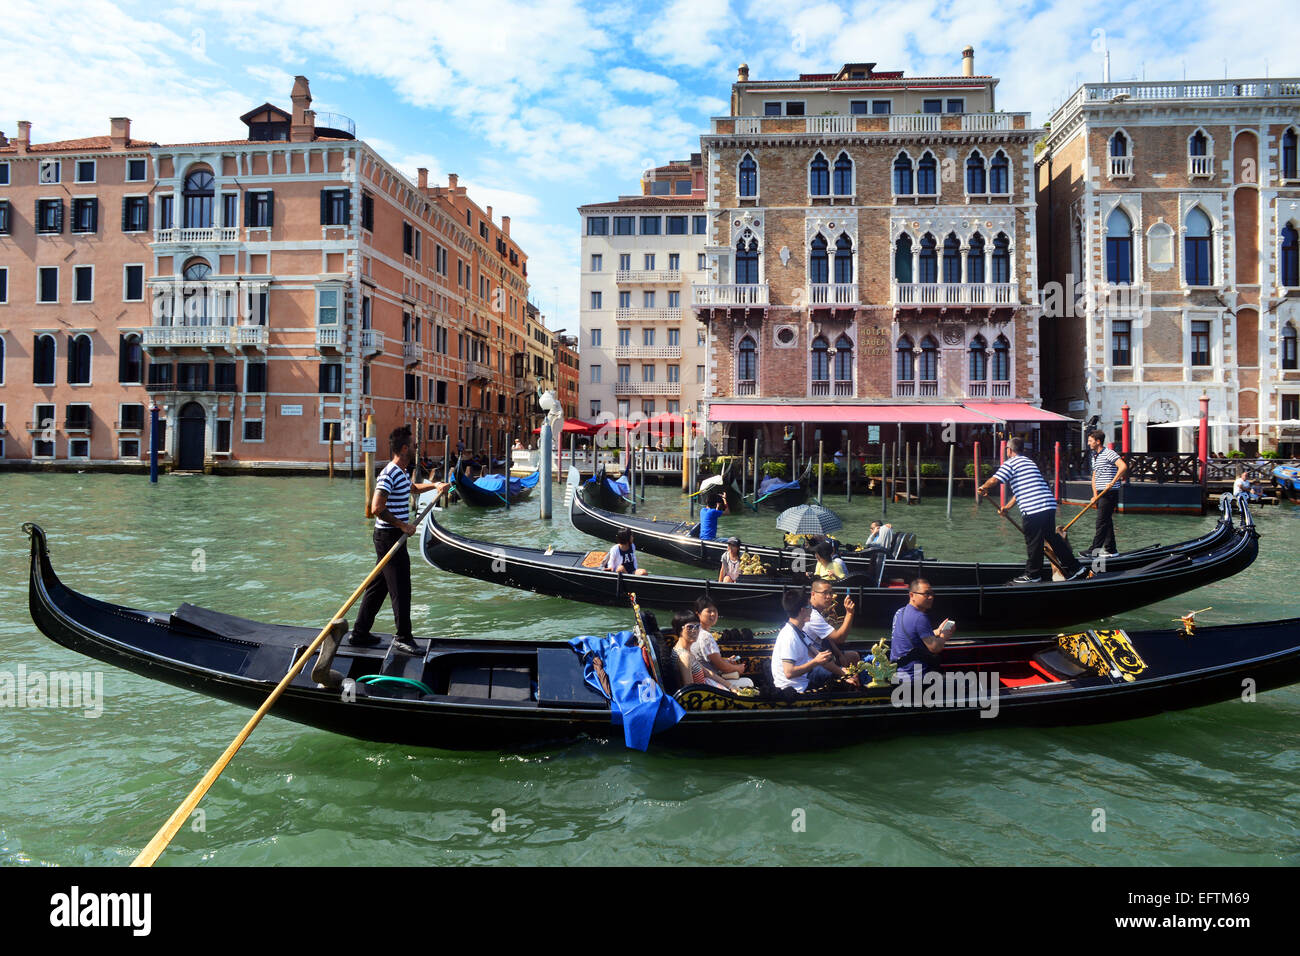 Gondolier steers his gondola up and down the Grand Canal, Venice Italy. Stock Photo